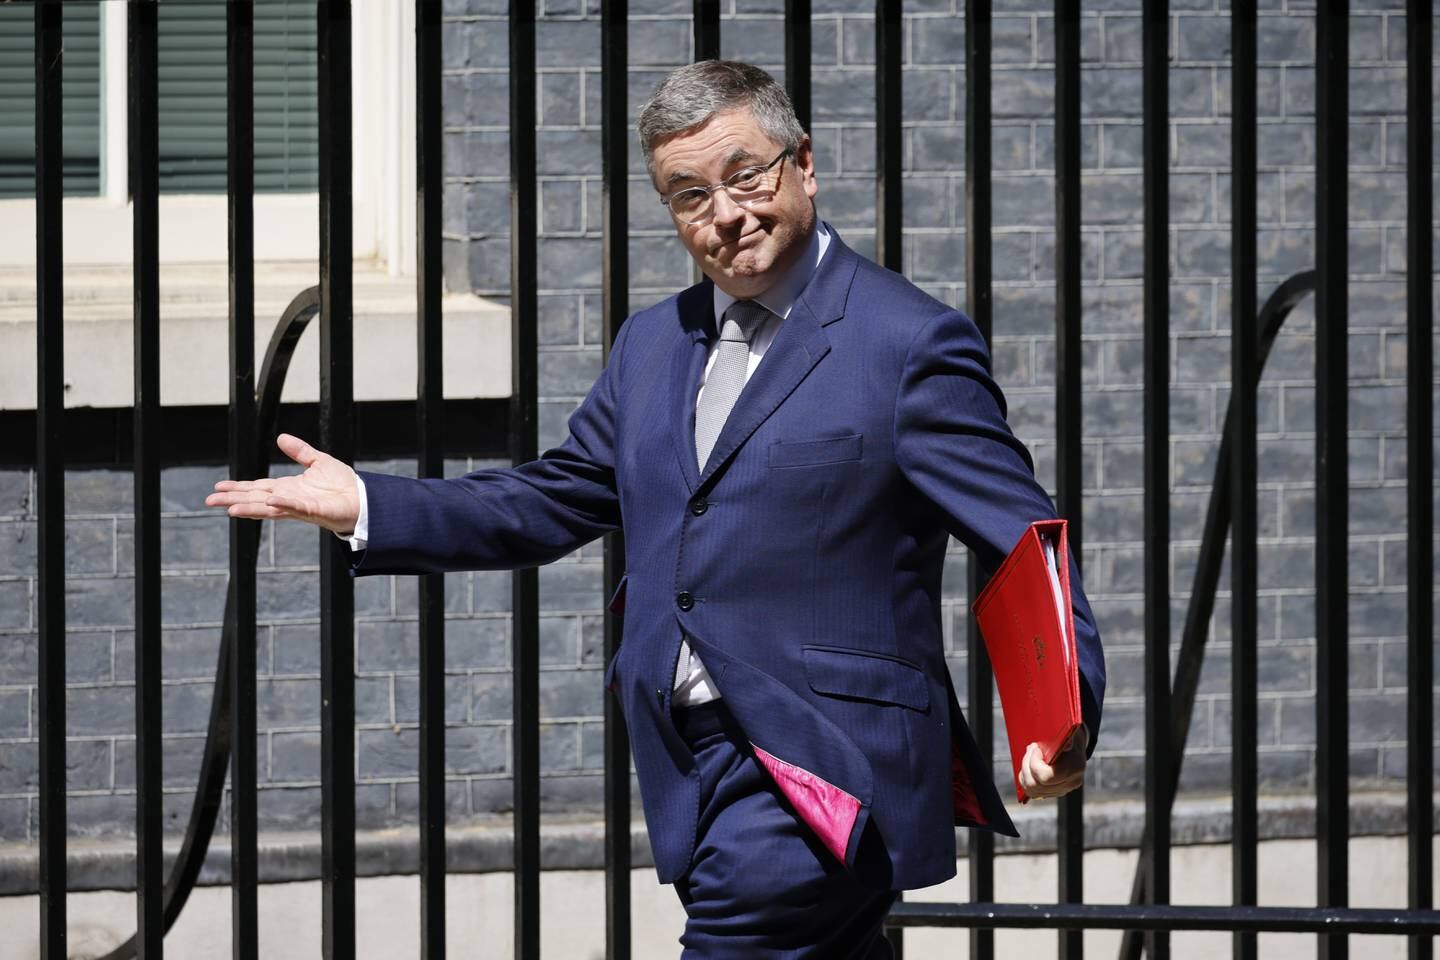 Sir Robert Buckland arrives for his first Cabinet meeting on Thursday after being appointed Secretary for Wales. EPA